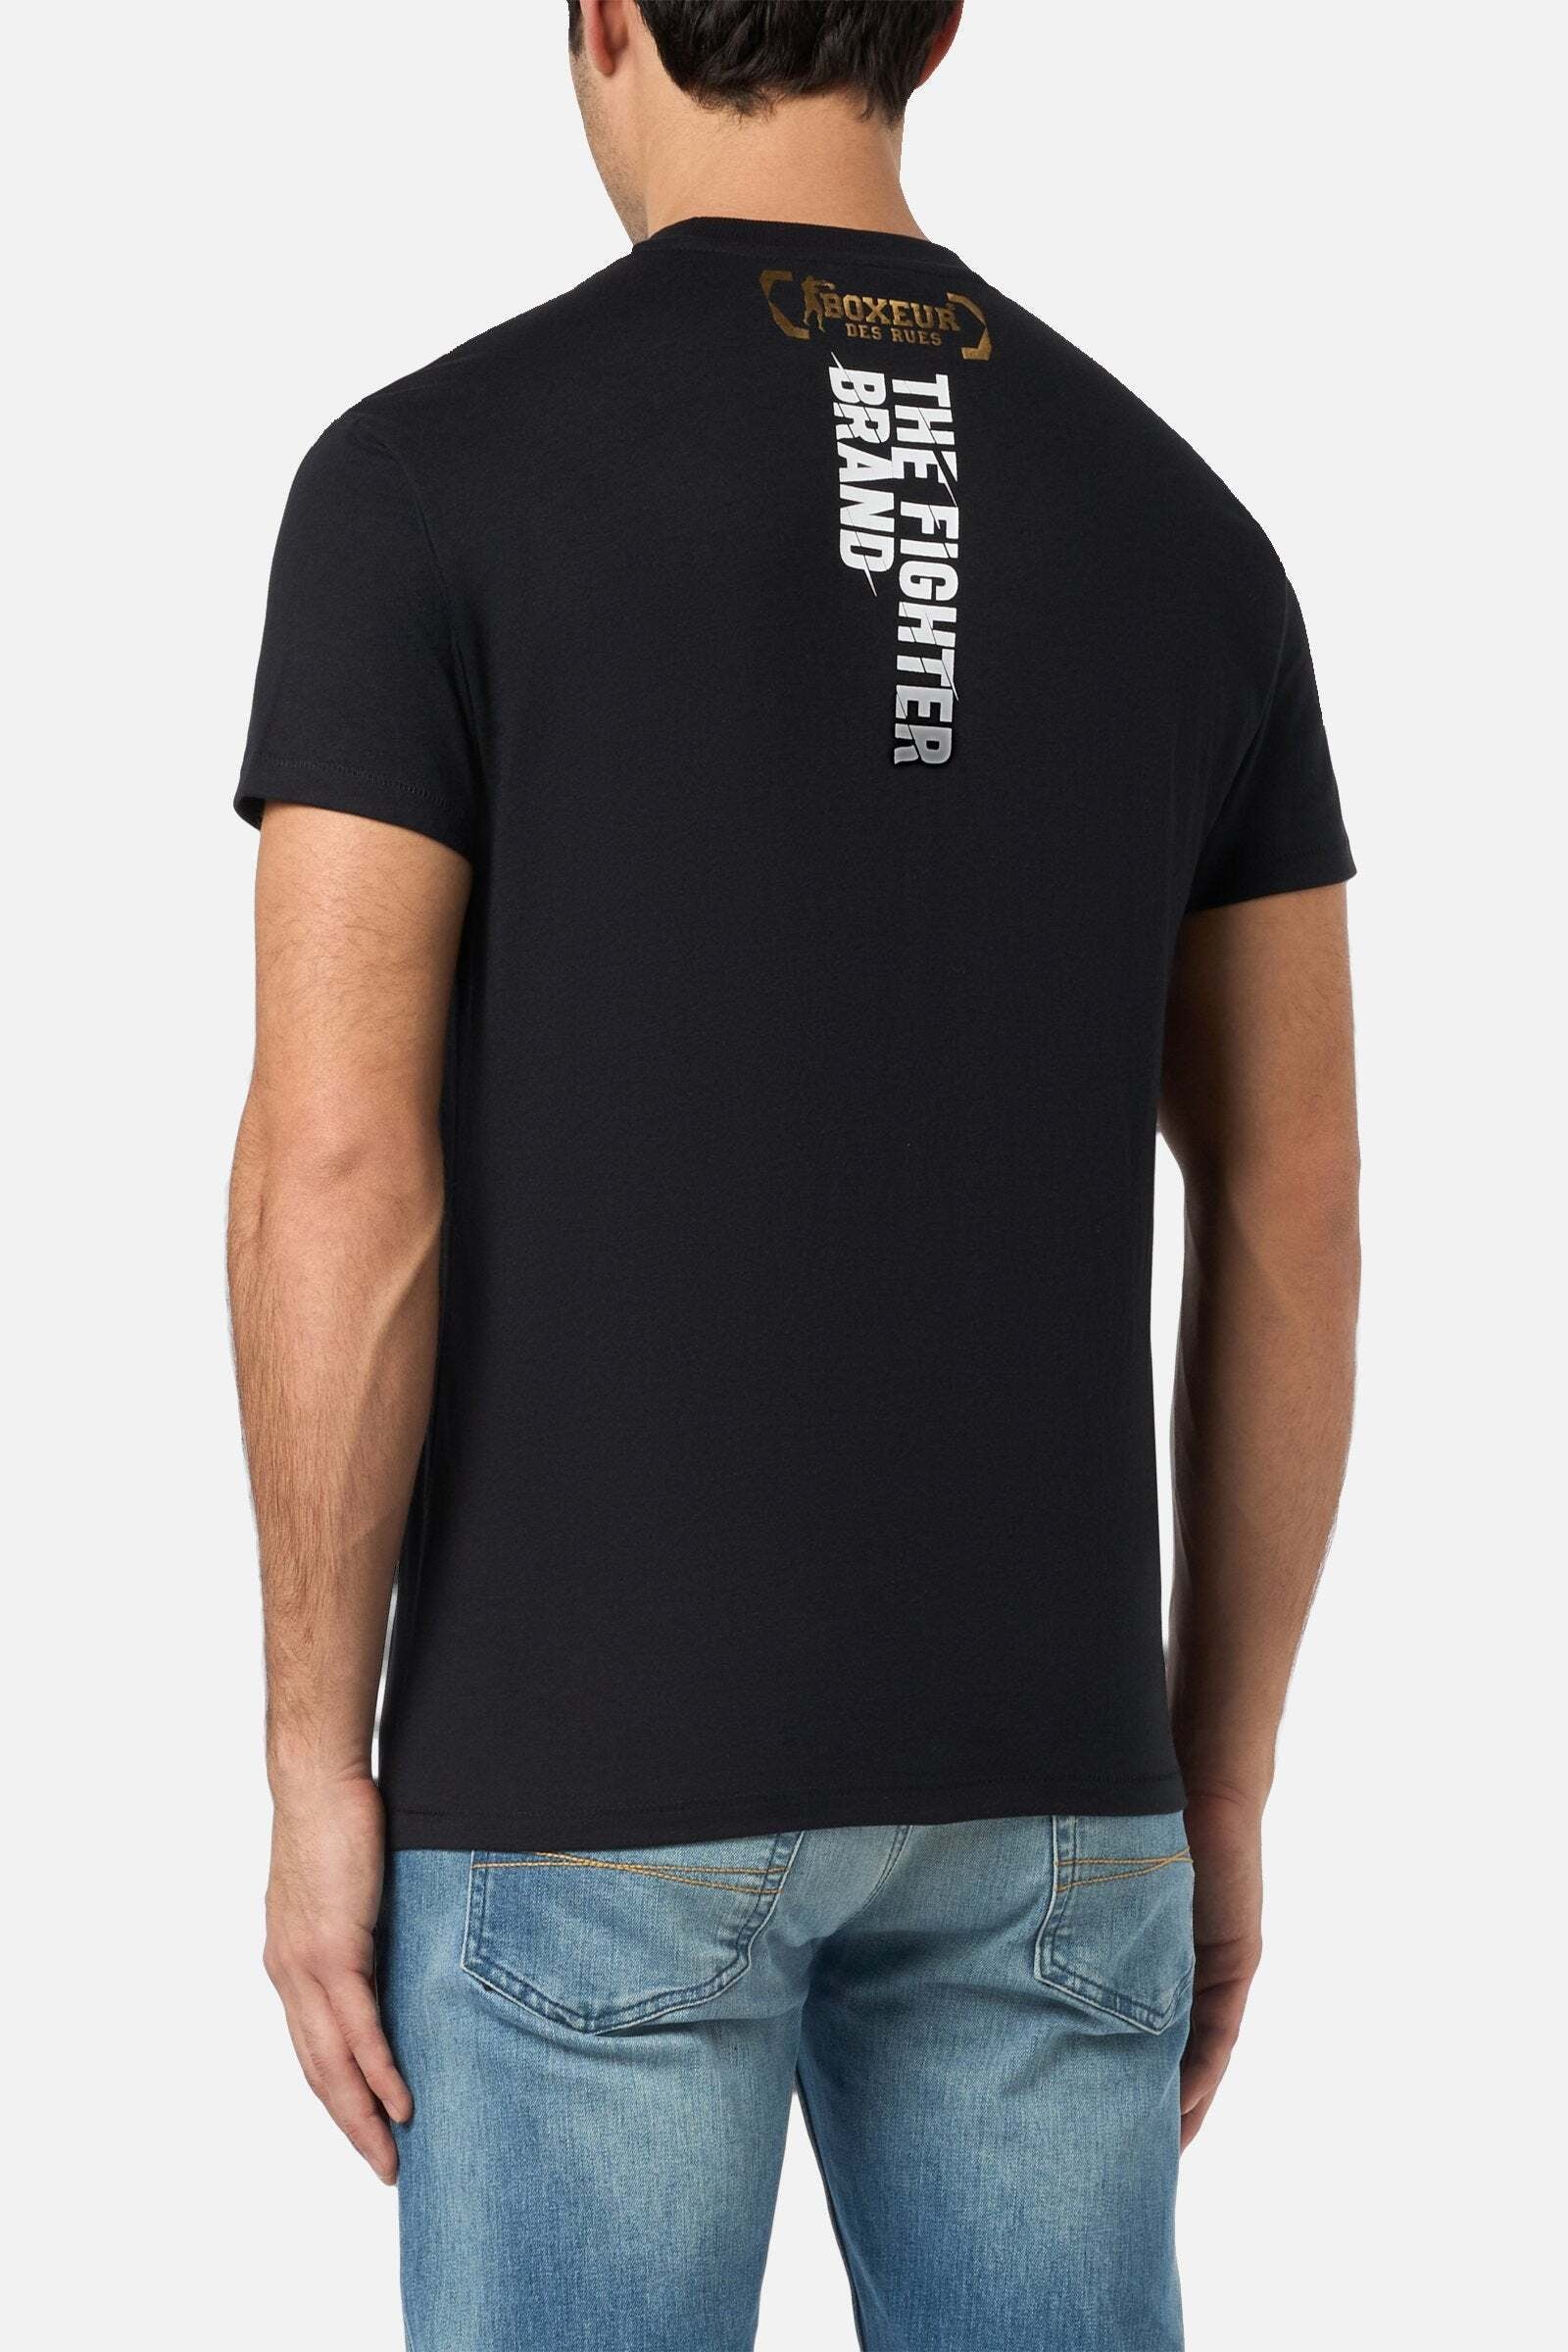 BOXEUR DES RUES T-Shirt »Boxeur des rues T-Shirts T-Shirt with Print«